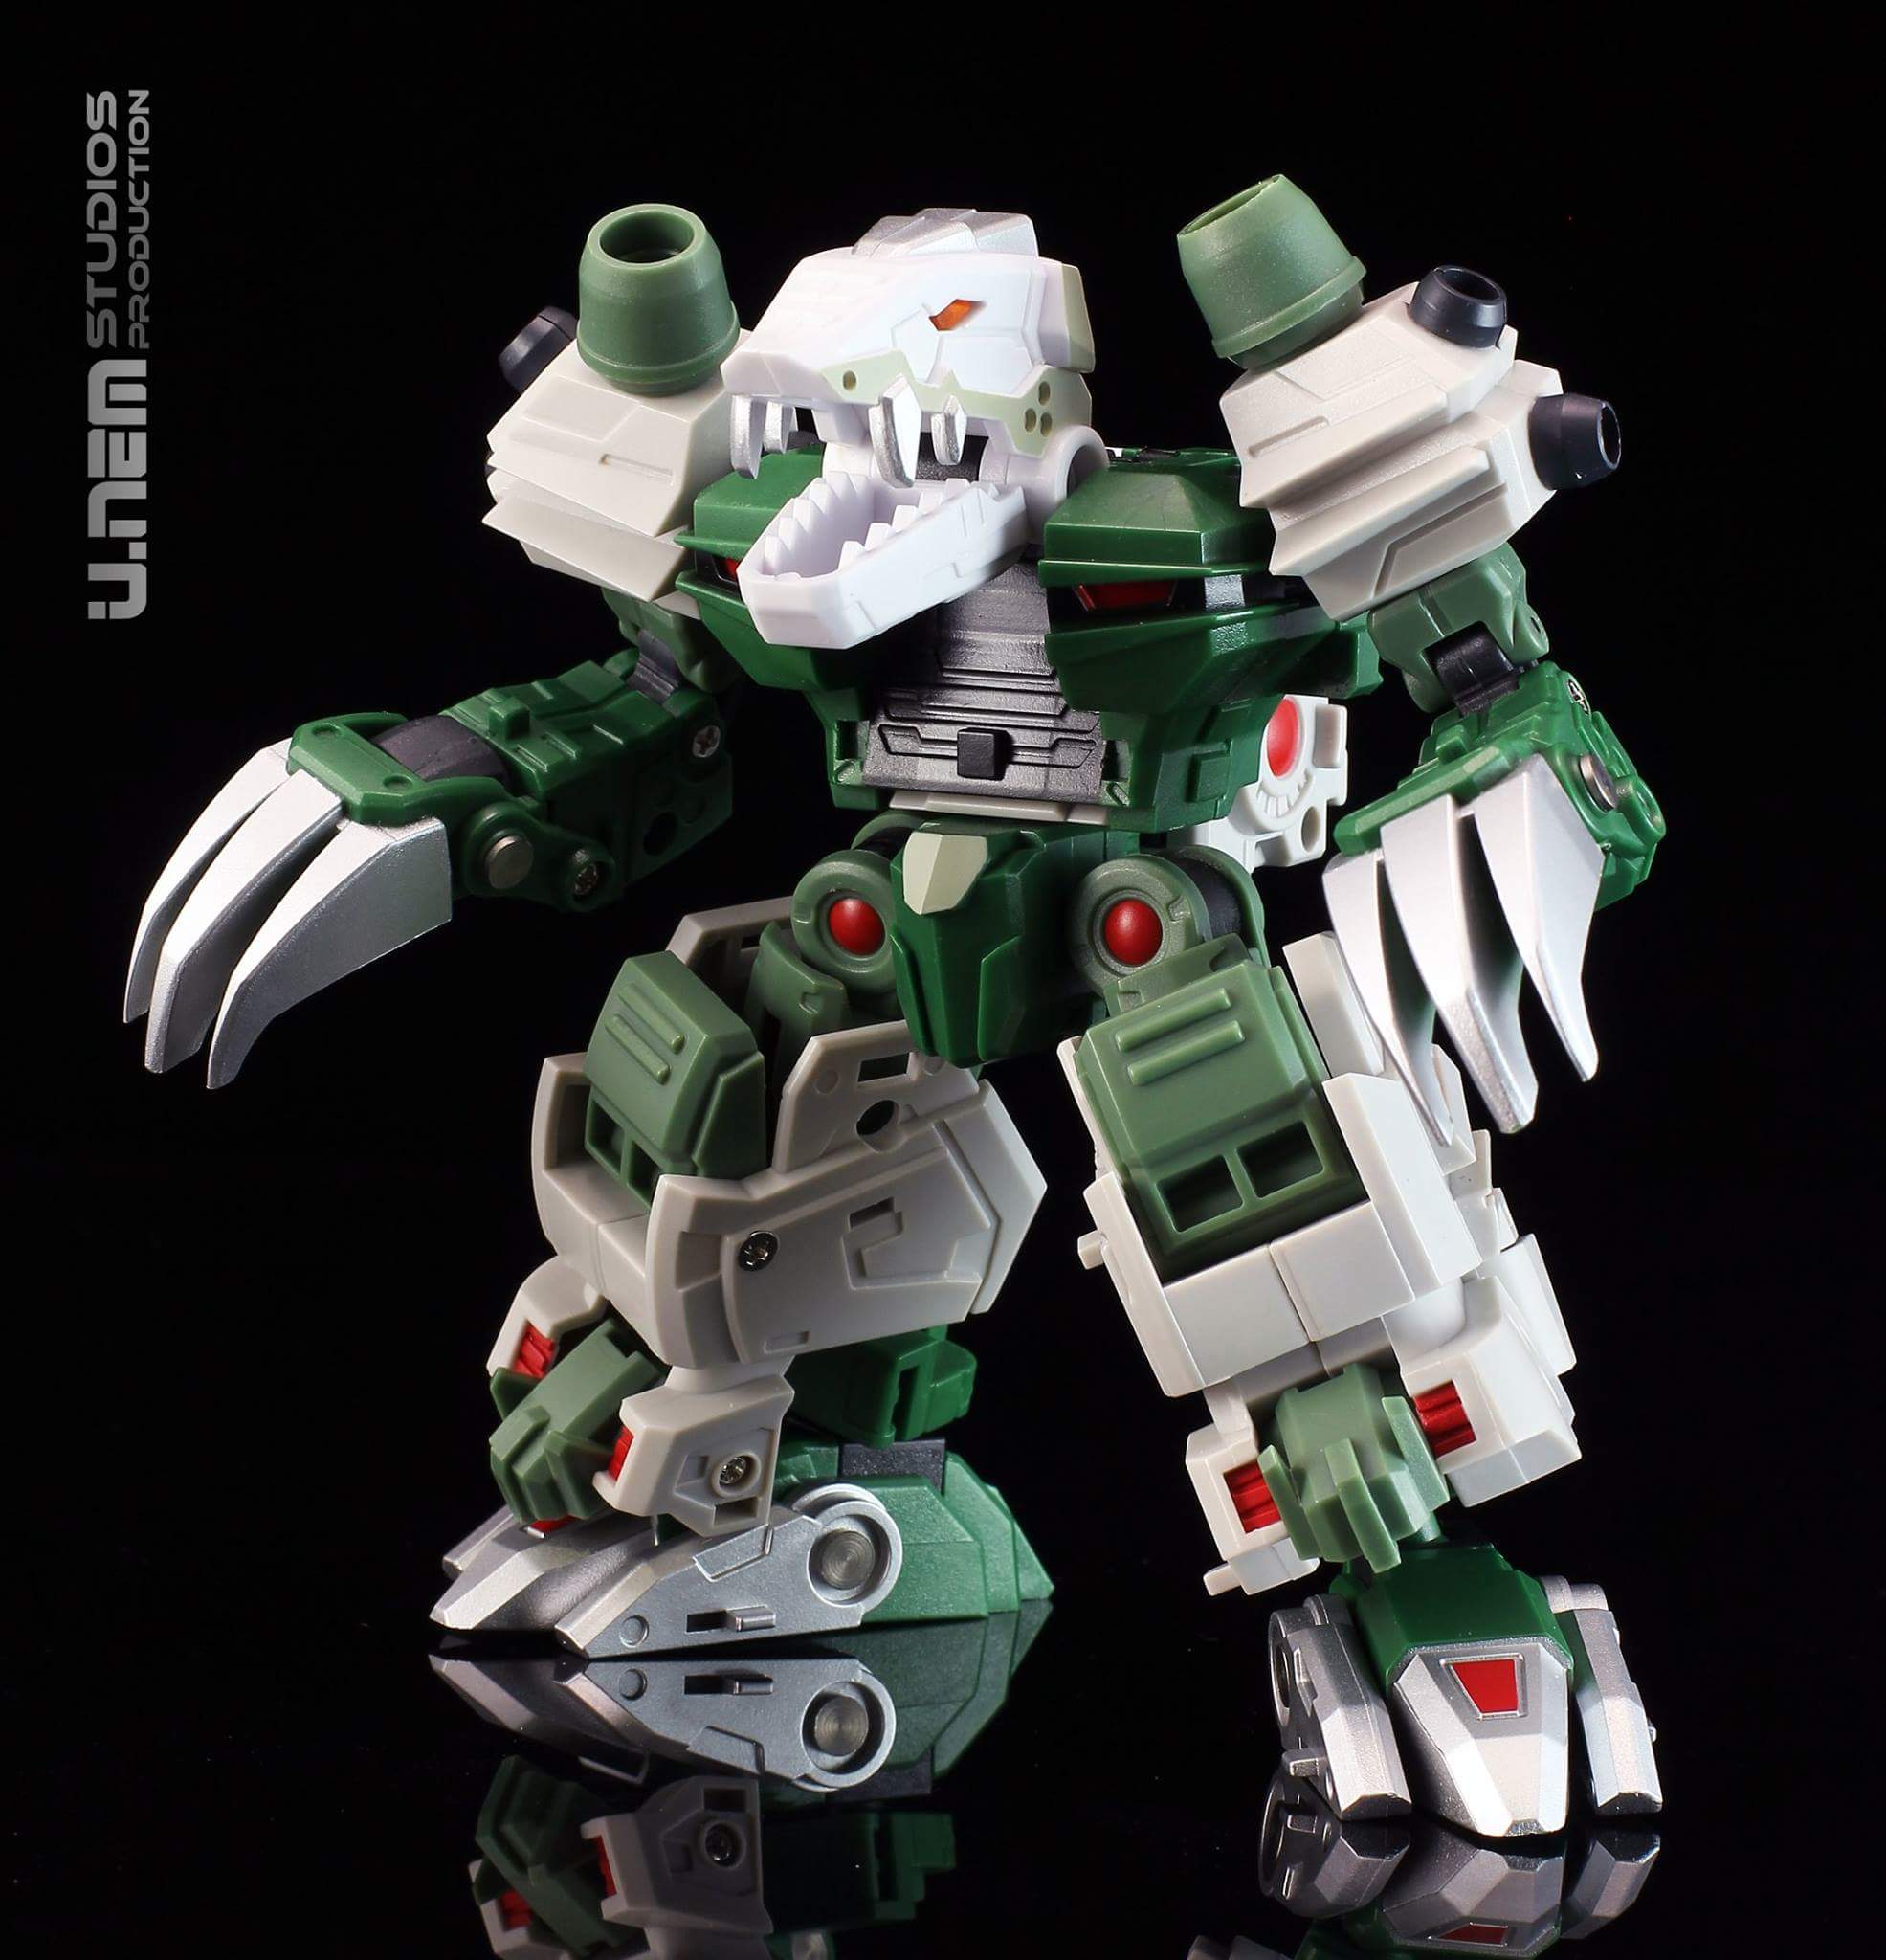 [FansProject] Produit Tiers - Ryu-Oh aka Dinoking (Victory) | Beastructor aka Monstructor (USA) - Page 3 ZUlEqNmO